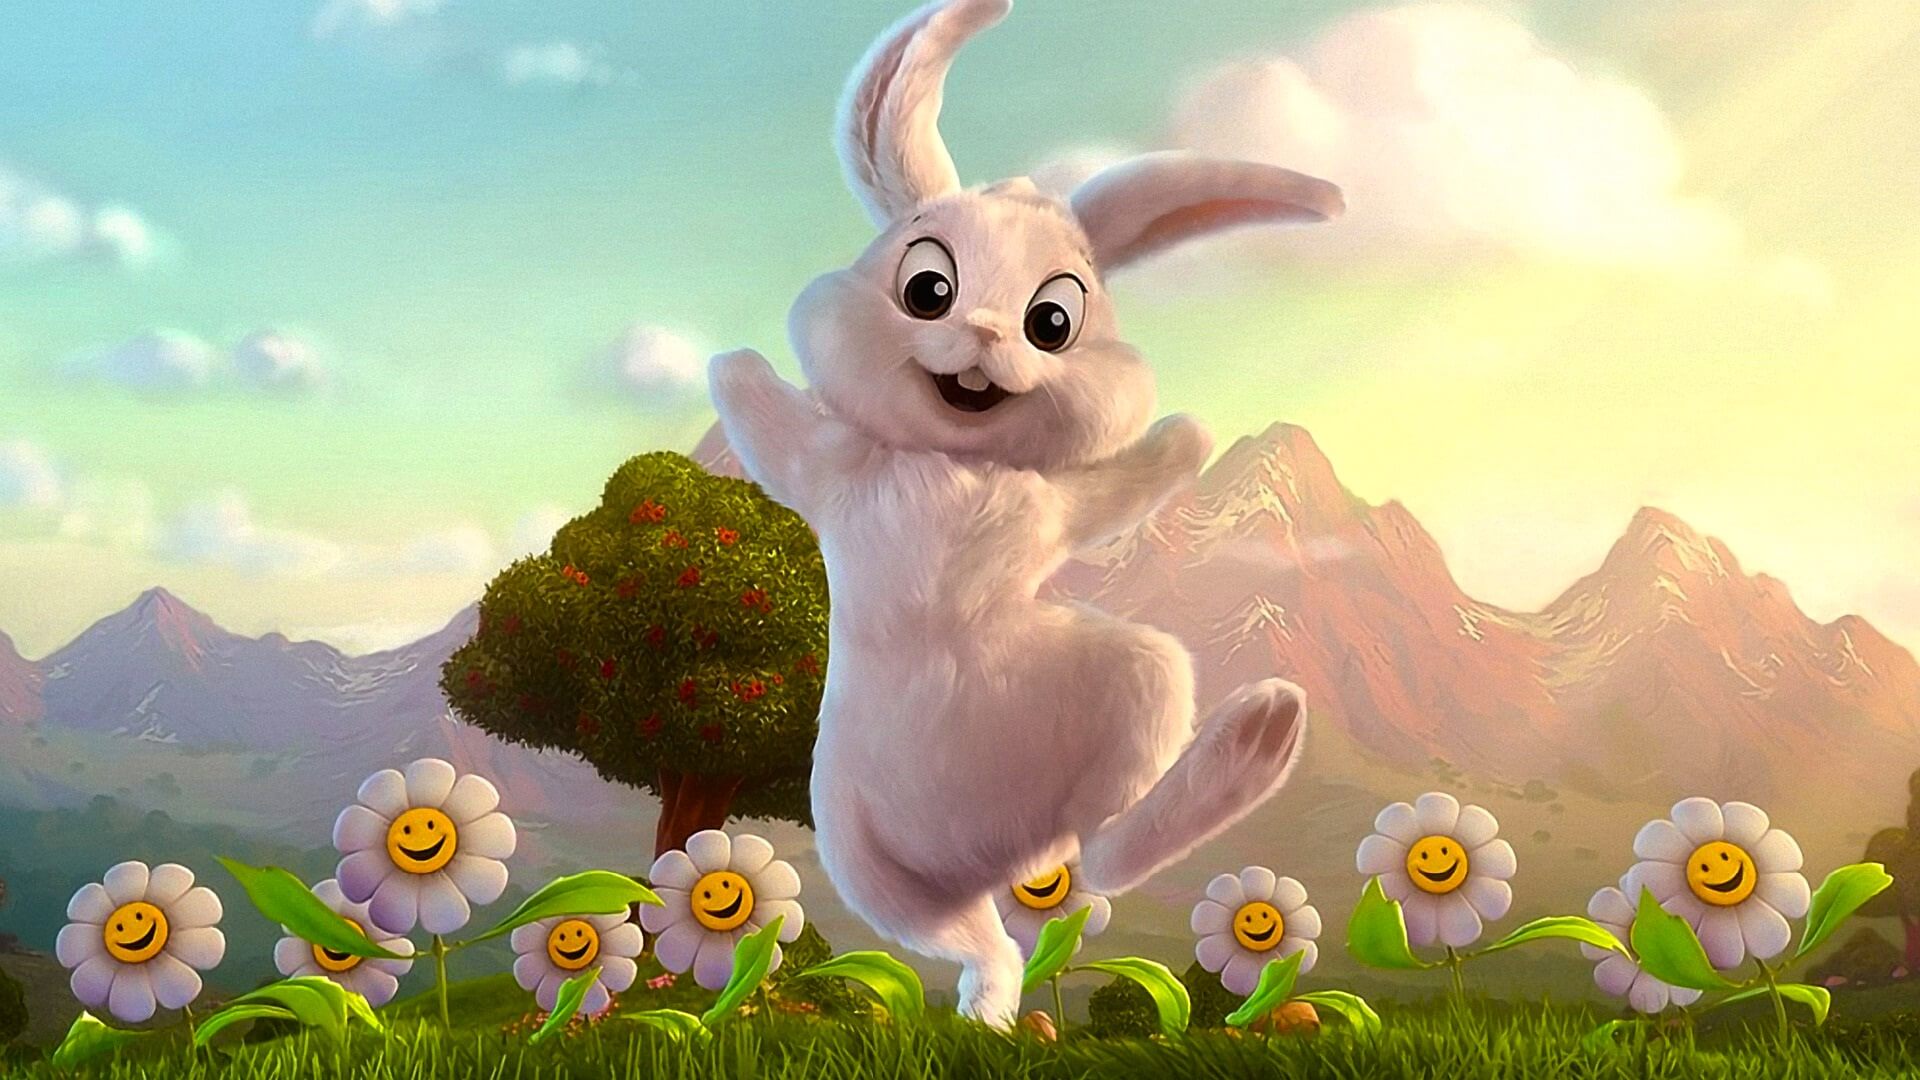 Happy Easter Images 2023, Pictures, Photos, HD Wallpaper Free Download 1